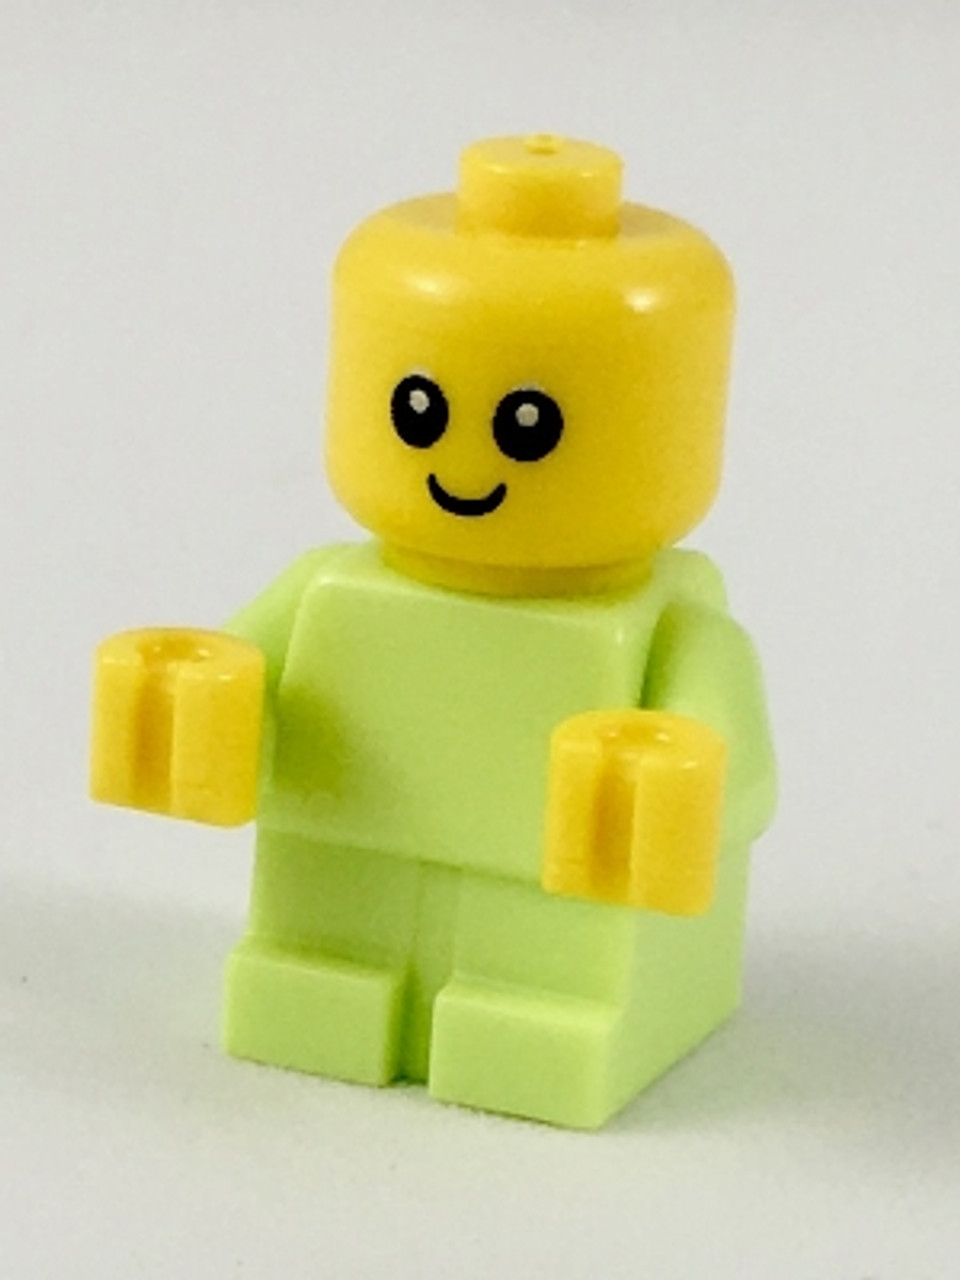 LEGO® City - Green Baby minifig small) from 60202 - The Brick People